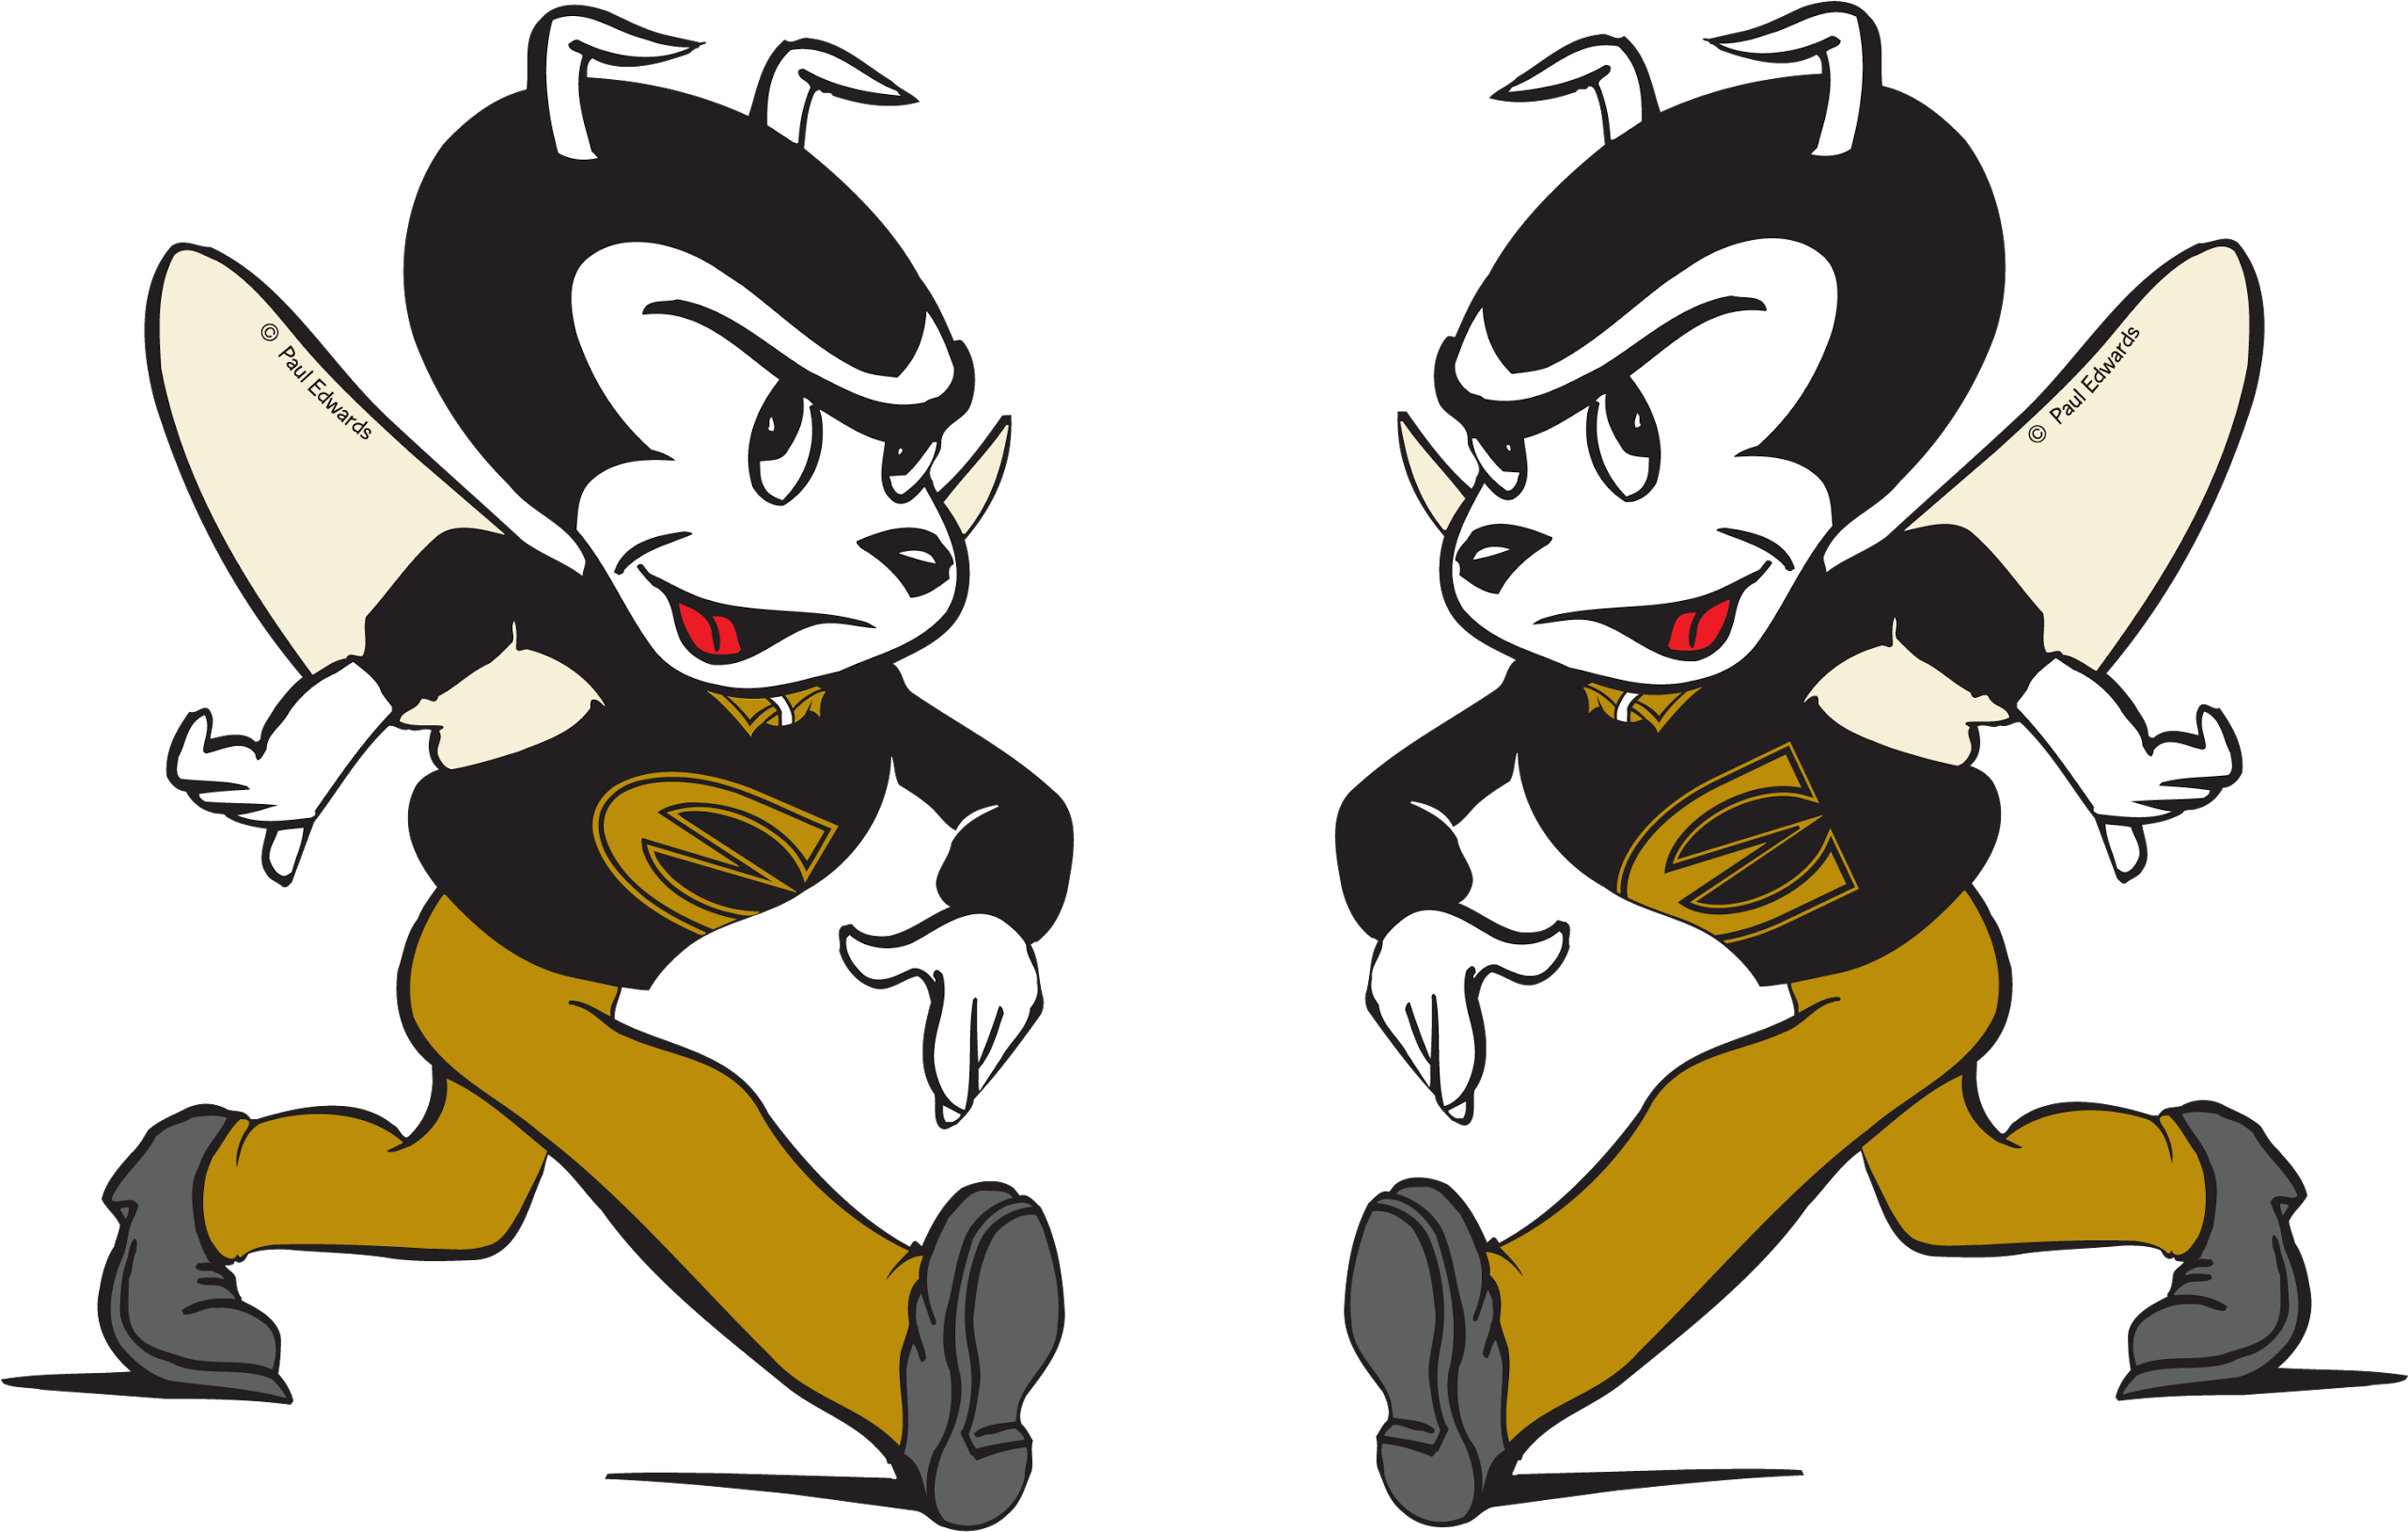 The Official University Mascot Is Corky The Hornet - Emporia State Hornets Logo Value Pint Glass (2560x1637)